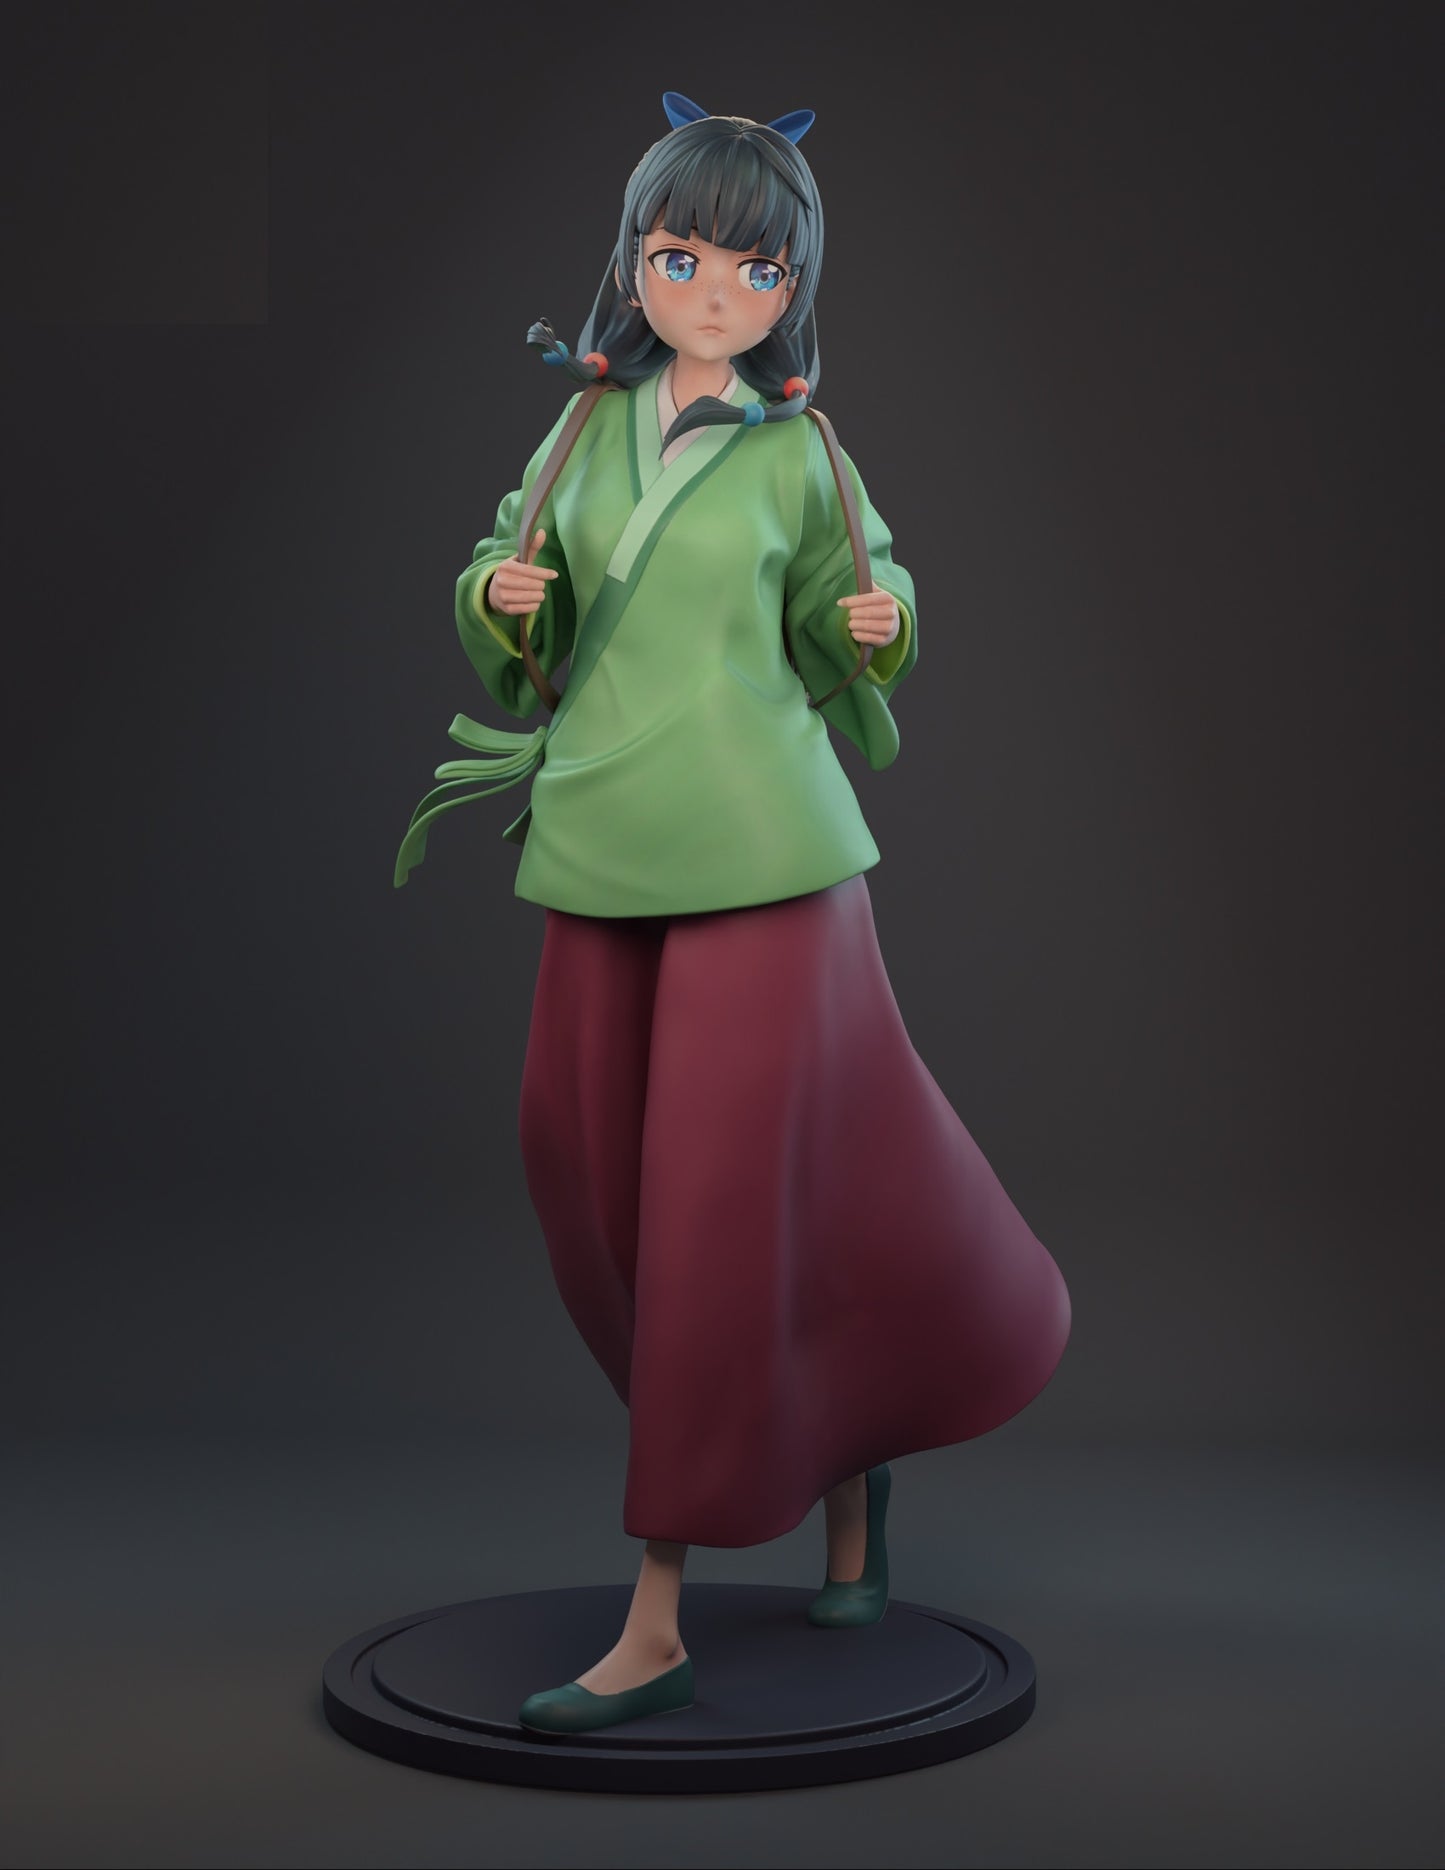 The Apothecary Diaries STL File 3D Printing Design Anime Character Maomao STL File 0159